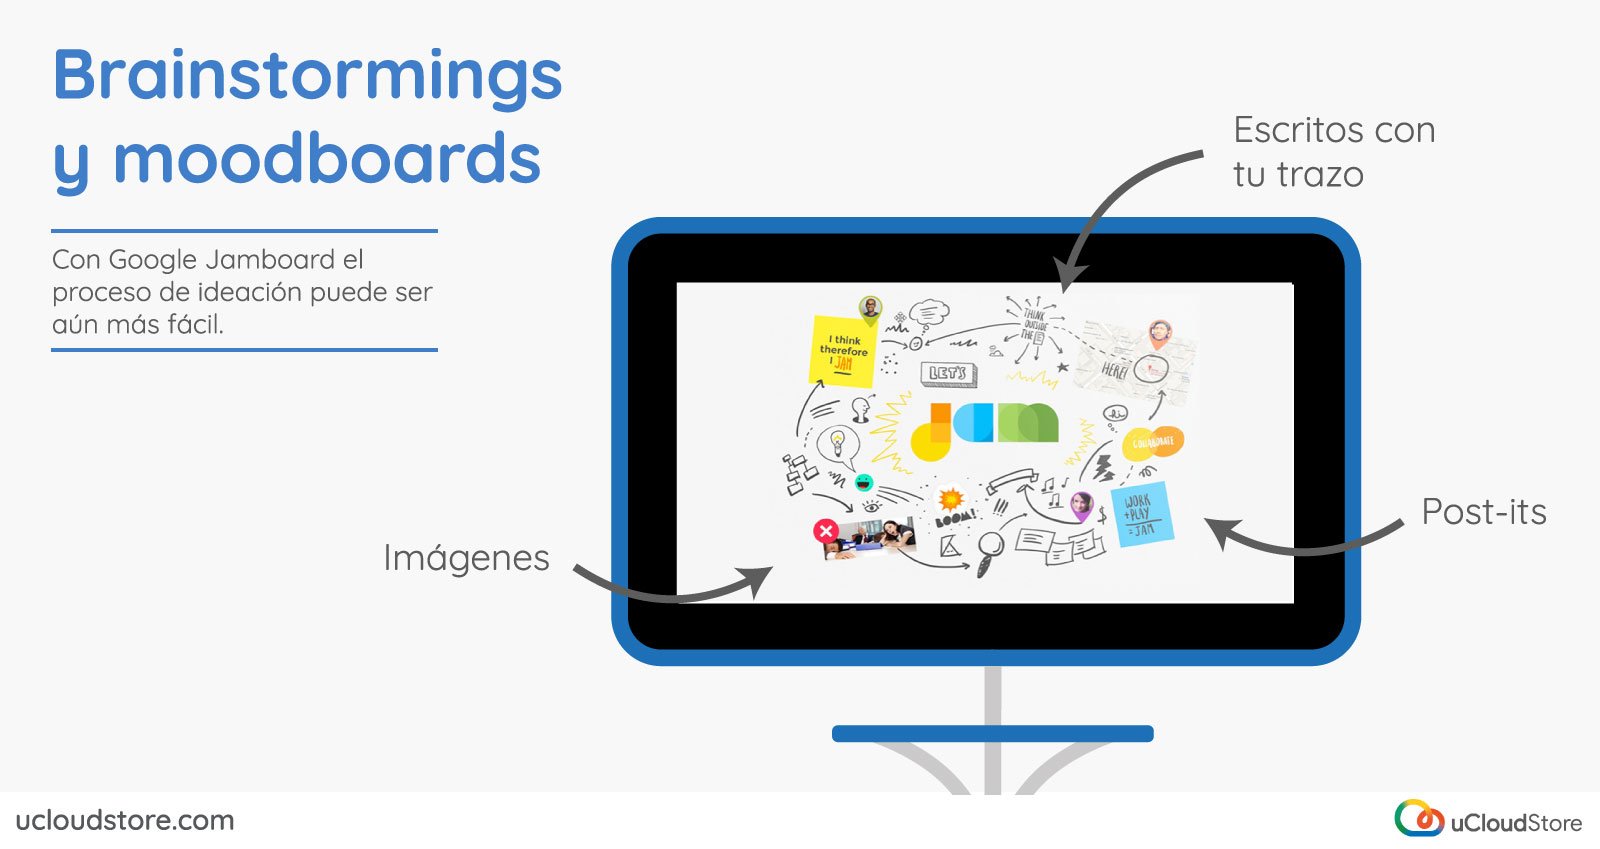 Image of Brainstormings and moodboards on Jamboard